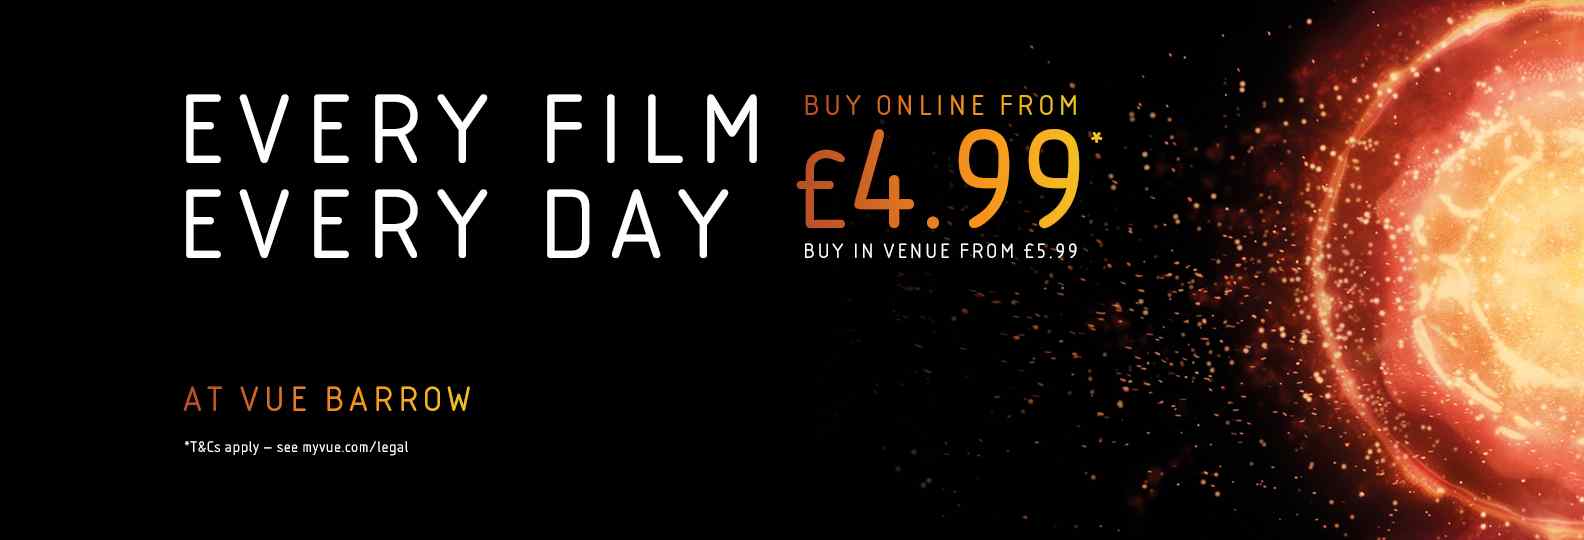 Vue Barrow | Every Film, Every Day from £4.99